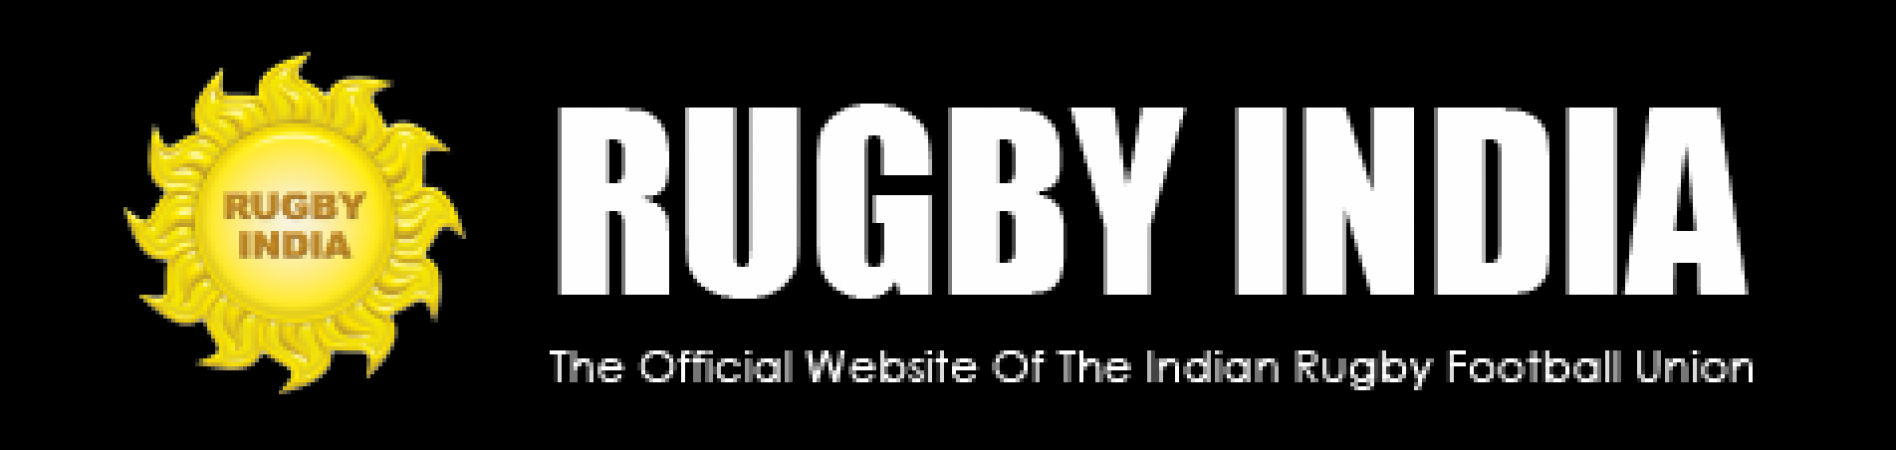 Odisha Government to sponsor Indian Rugby for 3 years